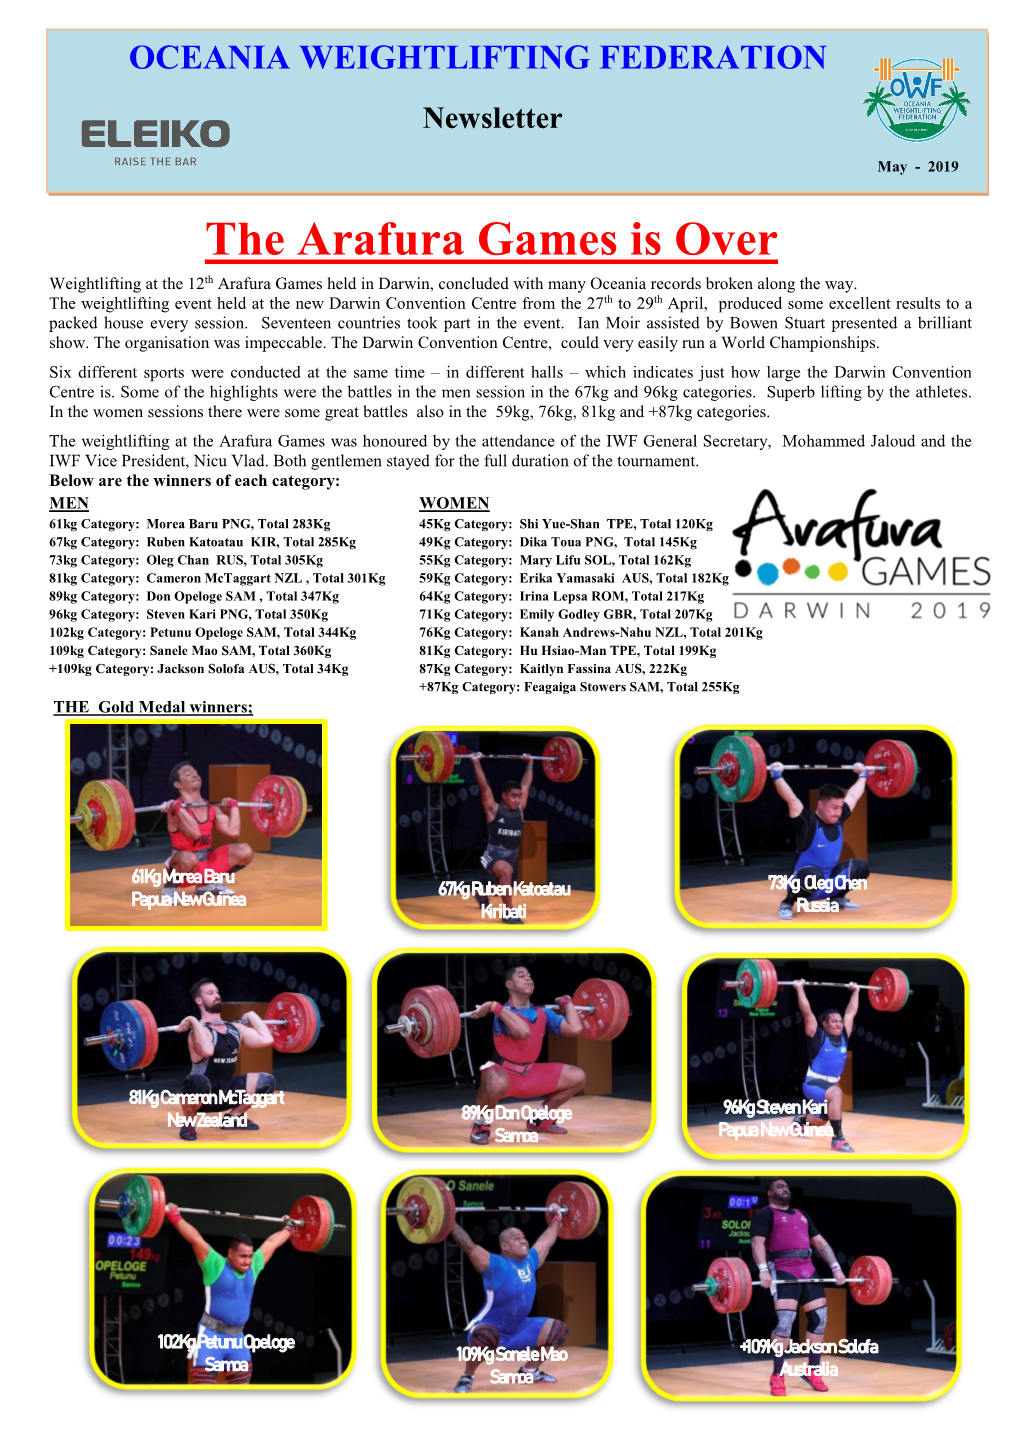 The Arafura Games Is Over Weightlifting at the 12Th Arafura Games Held in Darwin, Concluded with Many Oceania Records Broken Along the Way